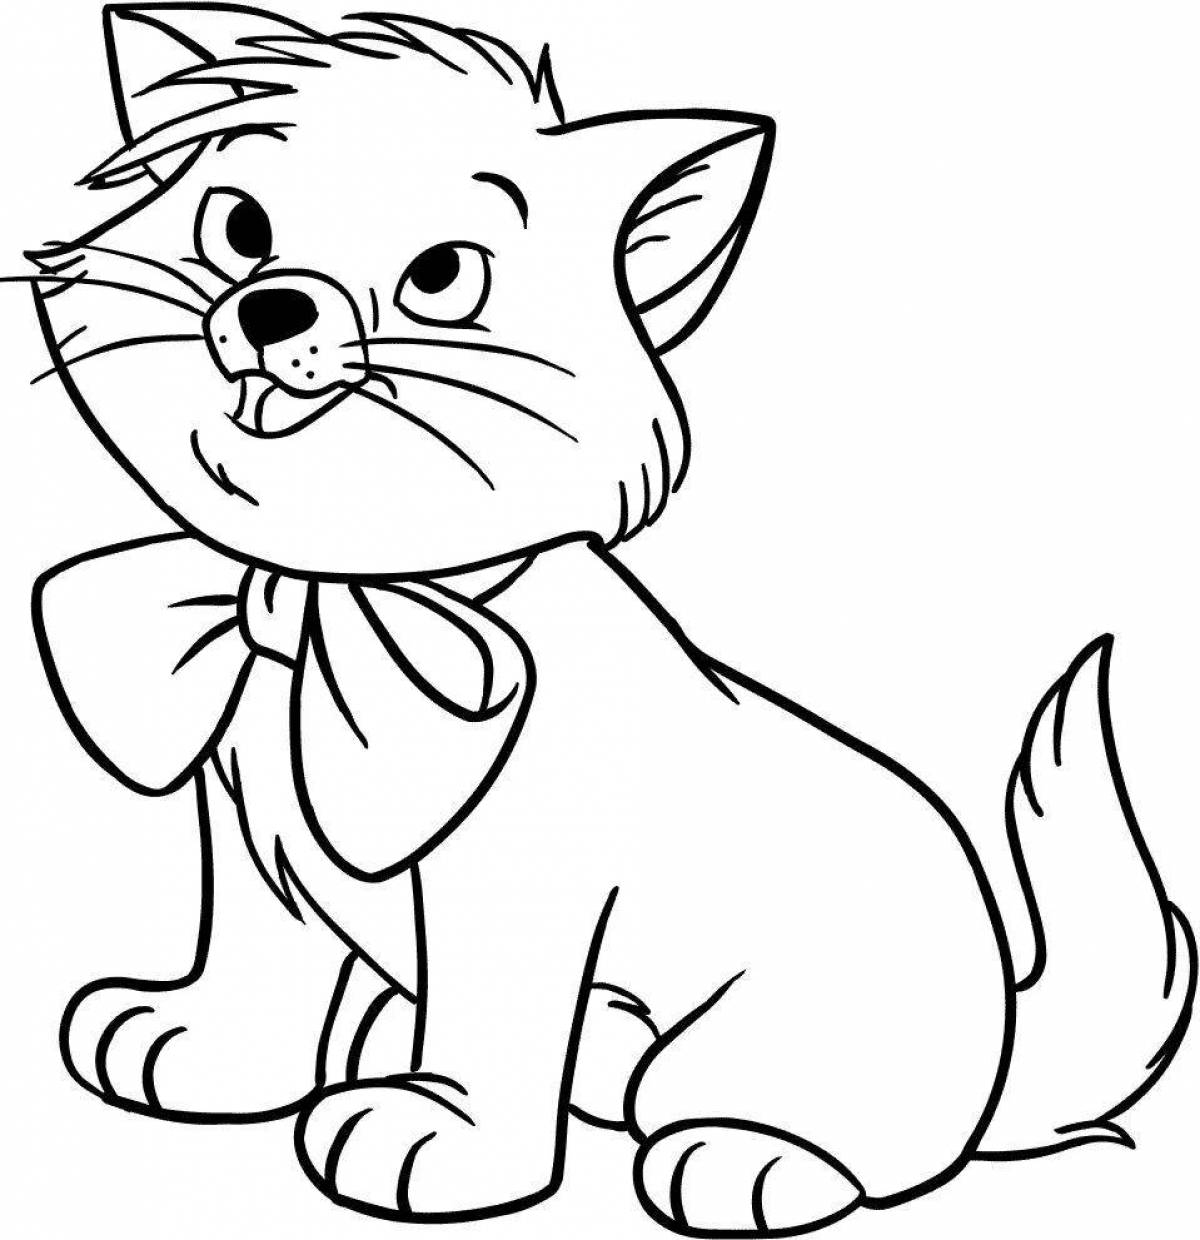 Curious cat coloring pages for boys